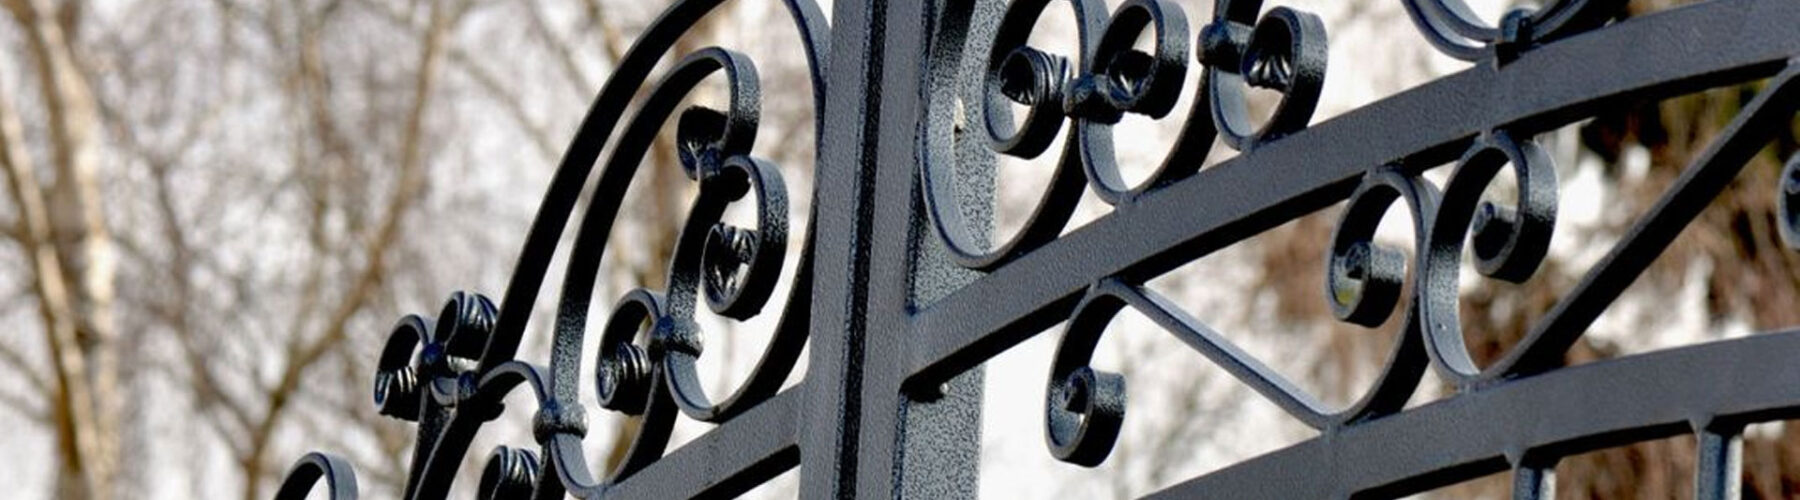 Reasons To Choose Iron Fencing For A Property